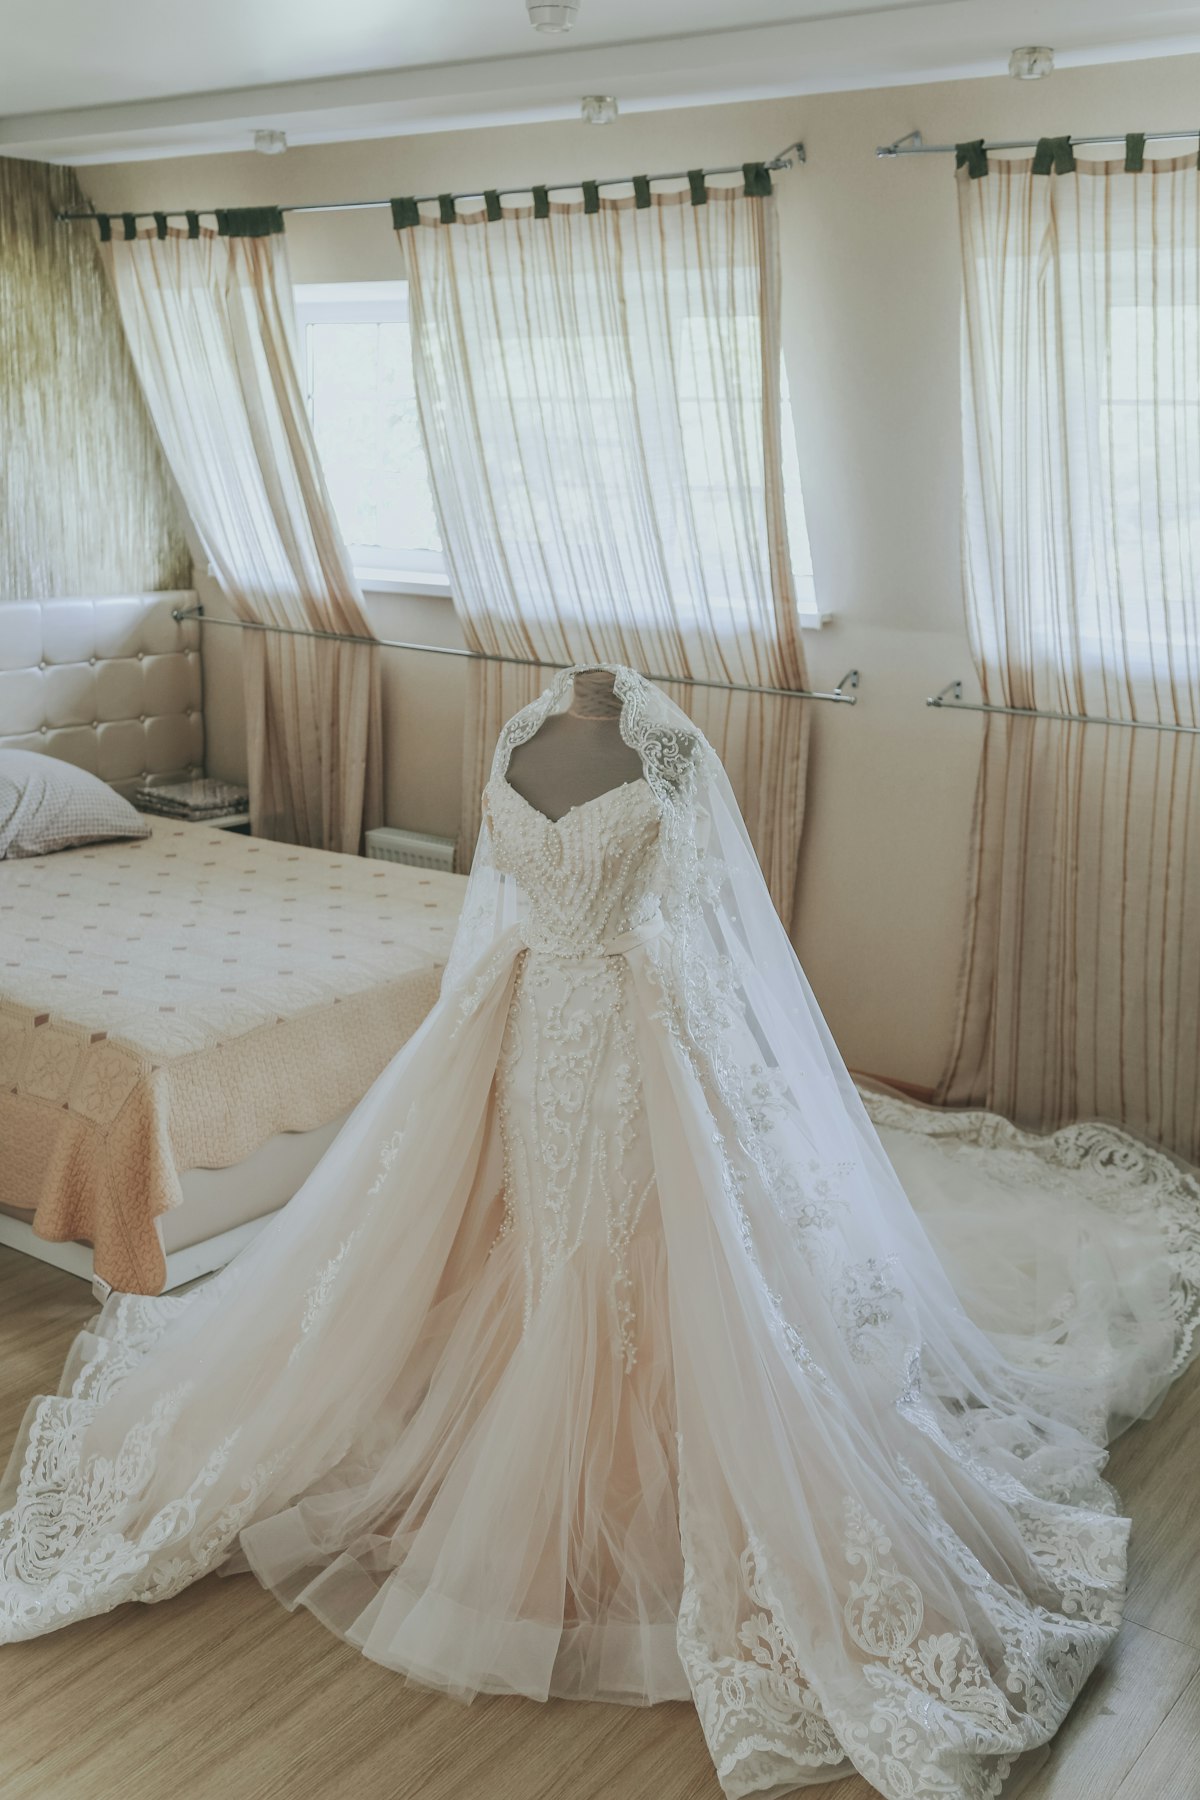 The History of Wedding Gowns: Evolution of Styles